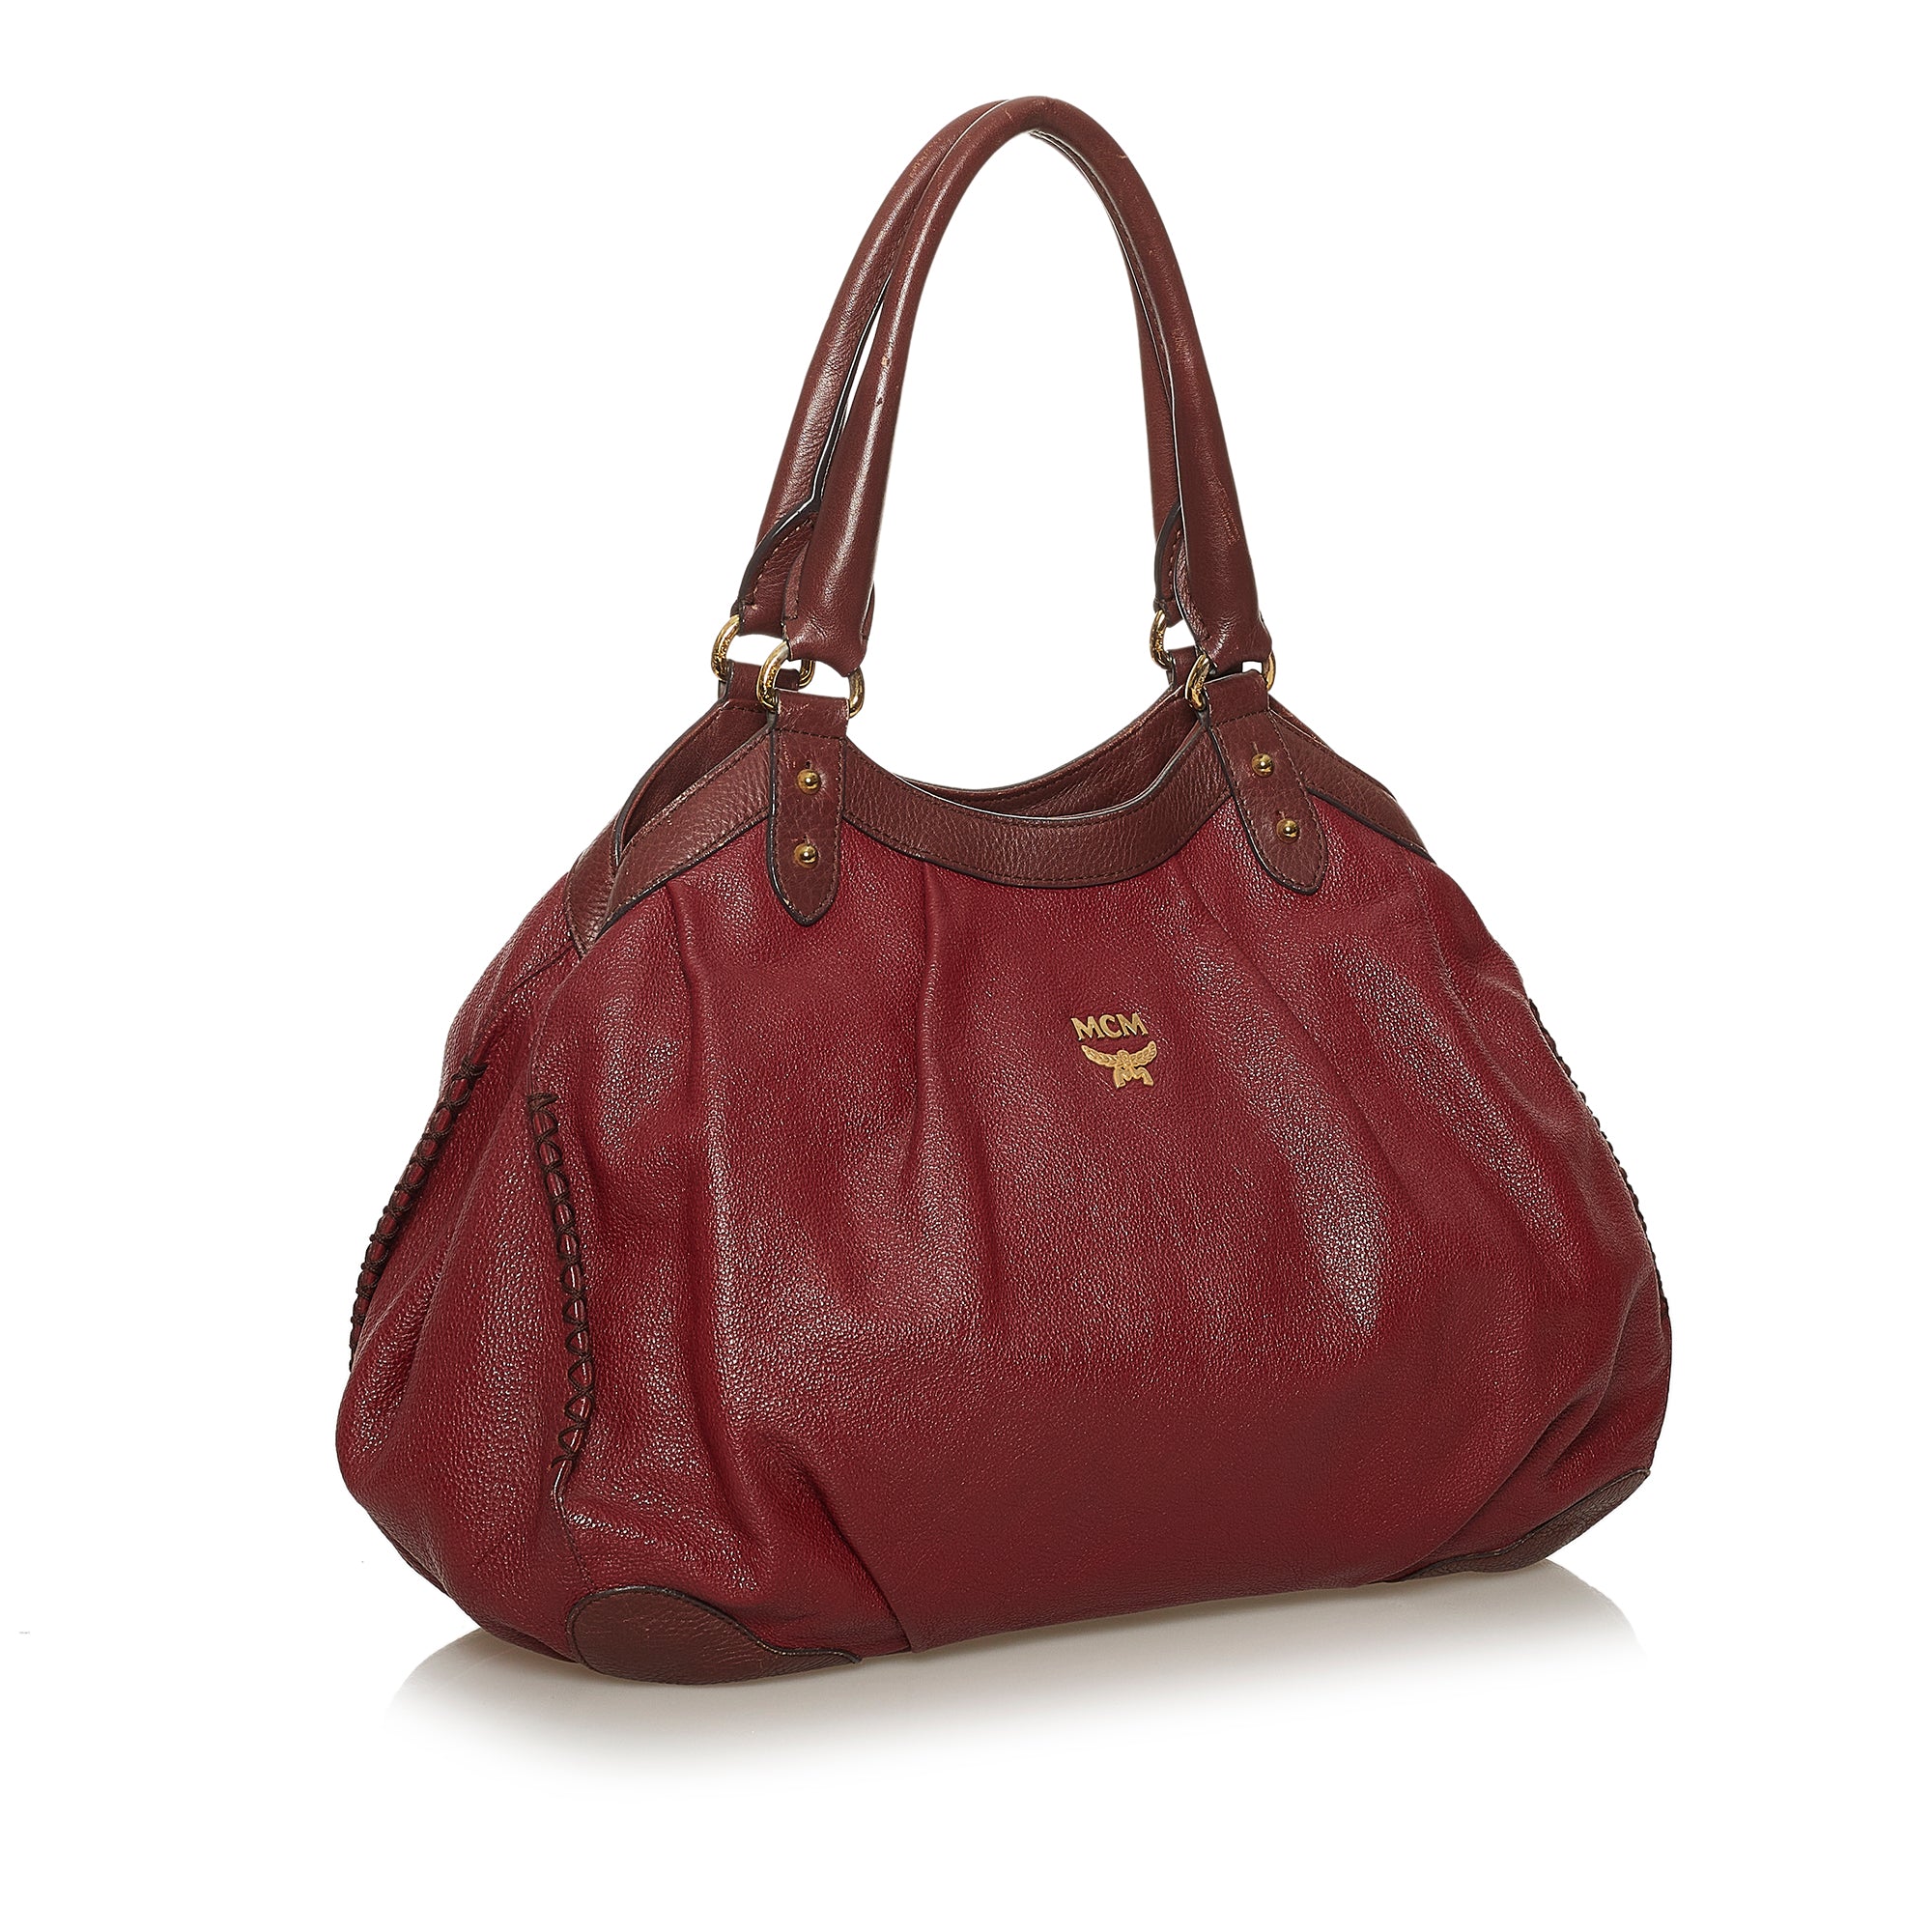 Red MCM Leather Tote Bag - Atelier-lumieresShops Revival